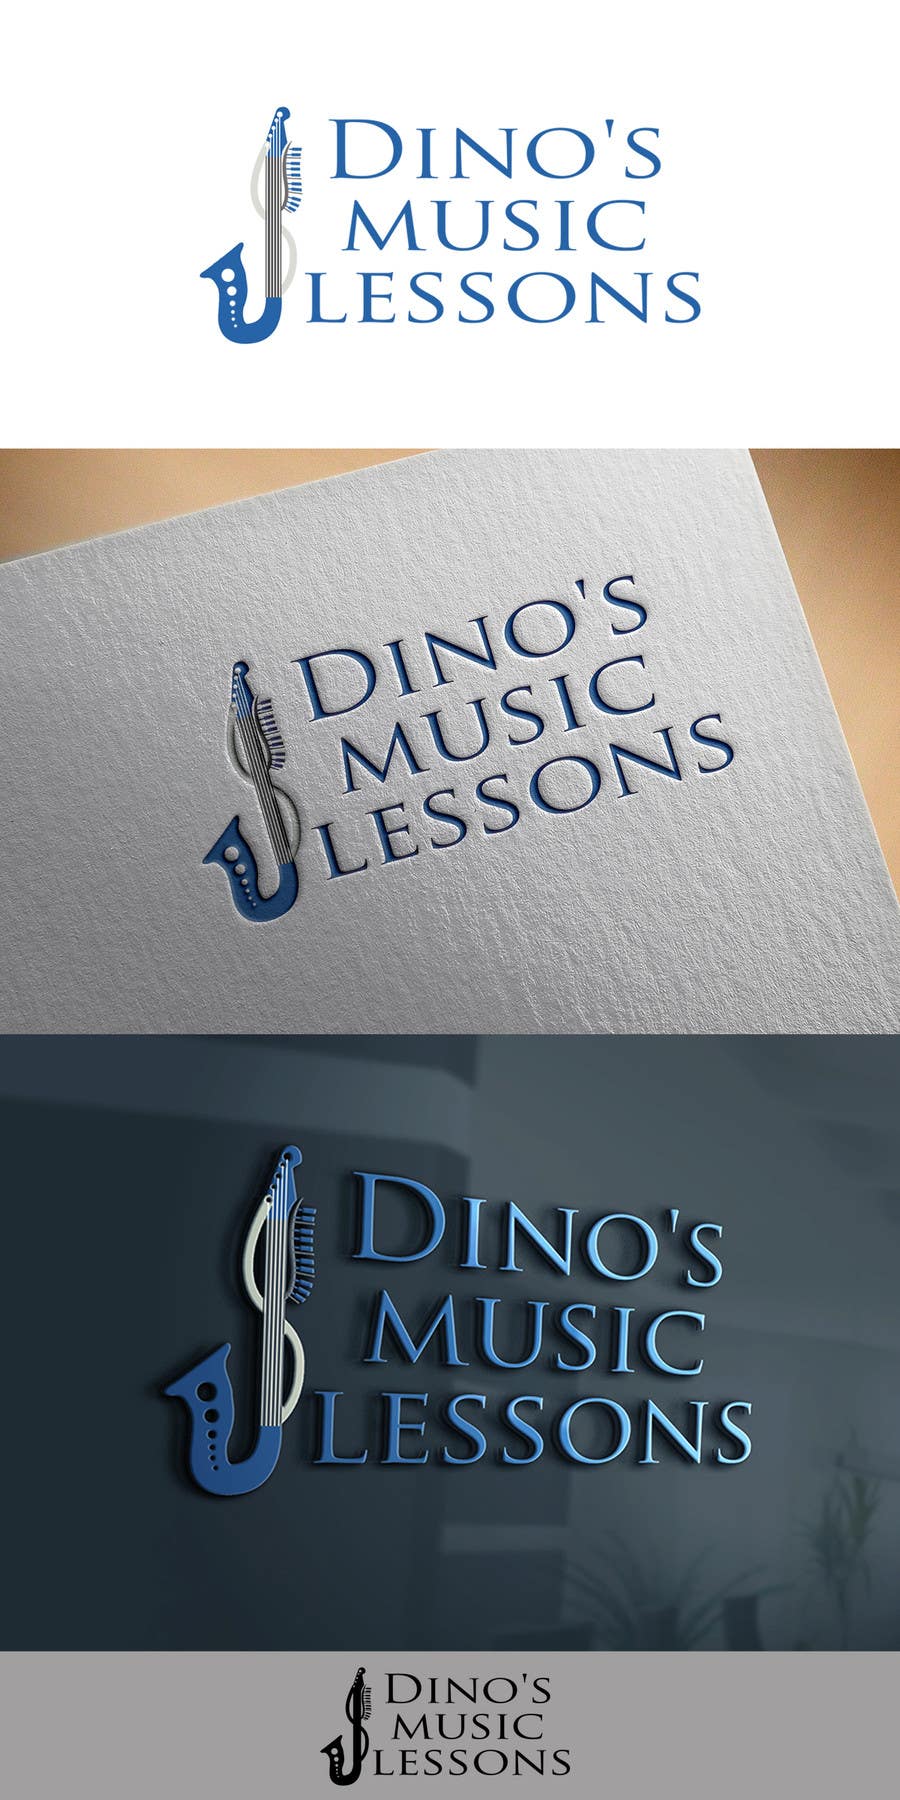 Contest Entry #14 for                                                 Design a Logo for "Dino's music lessons"
                                            